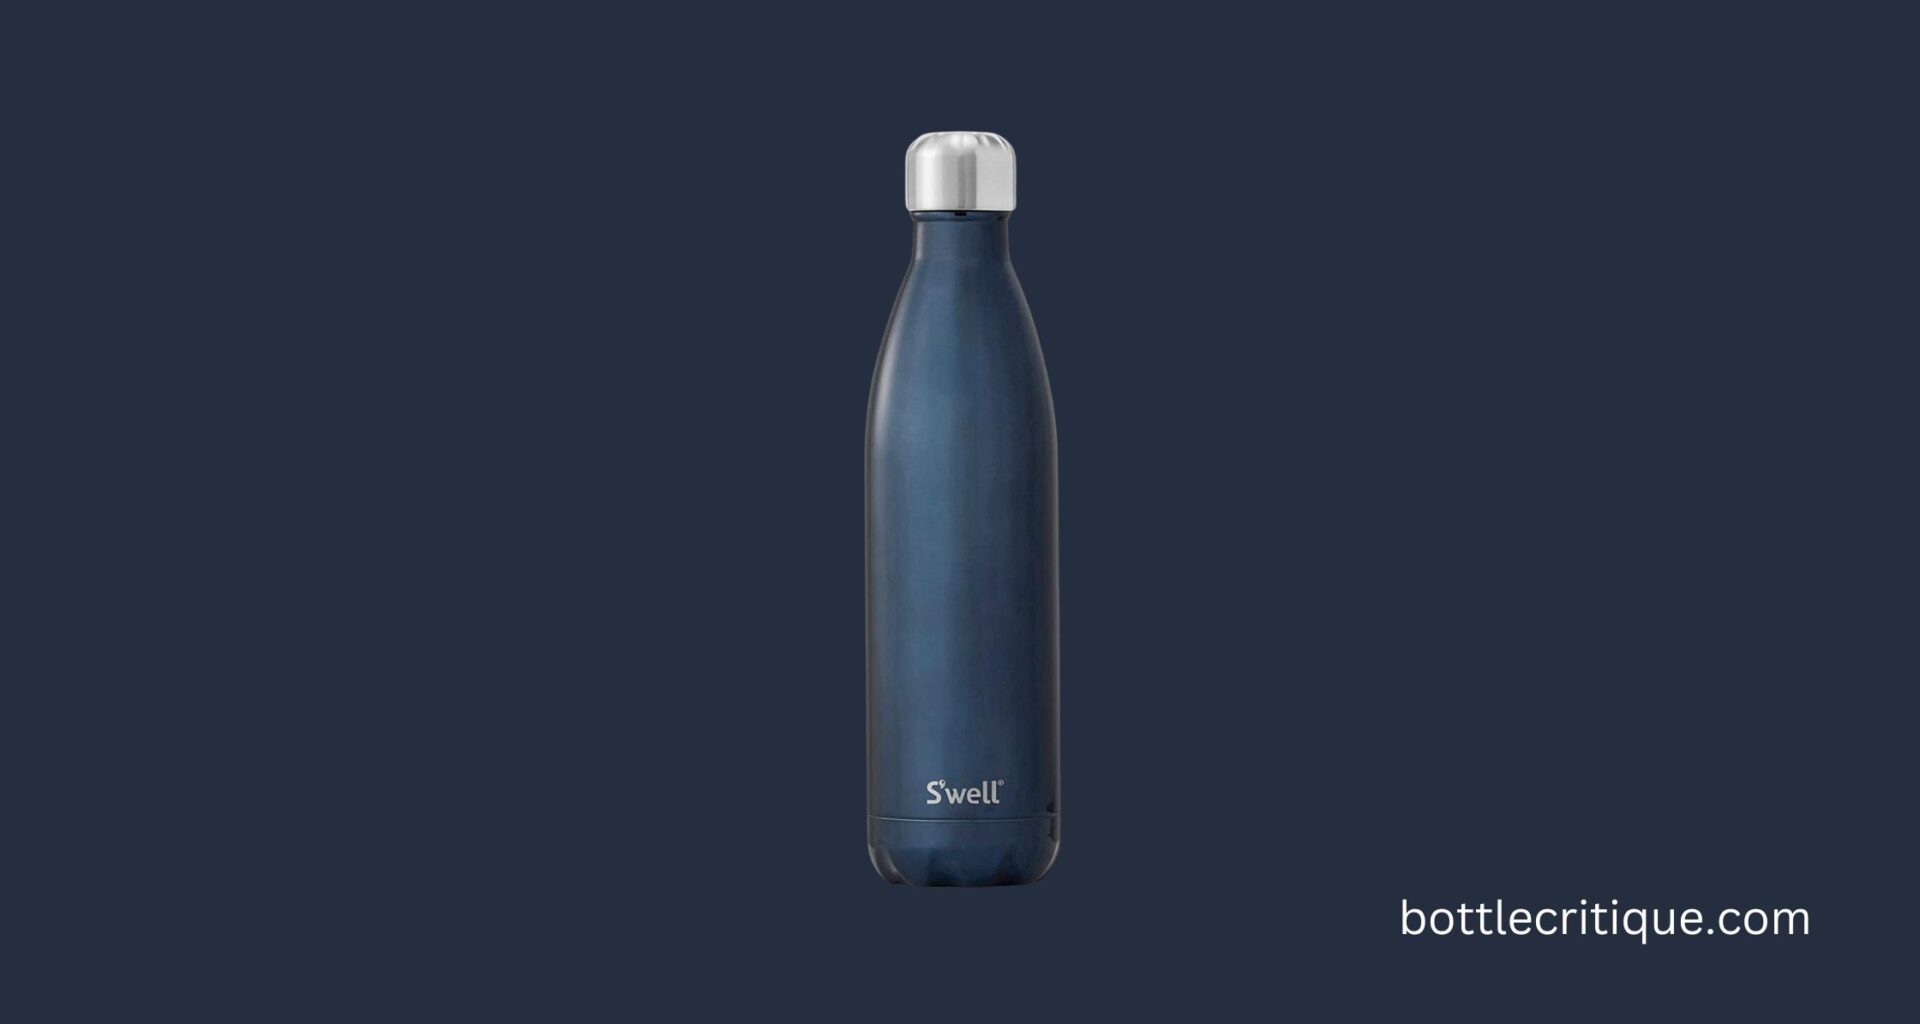 How to Use Swell Water Bottle?